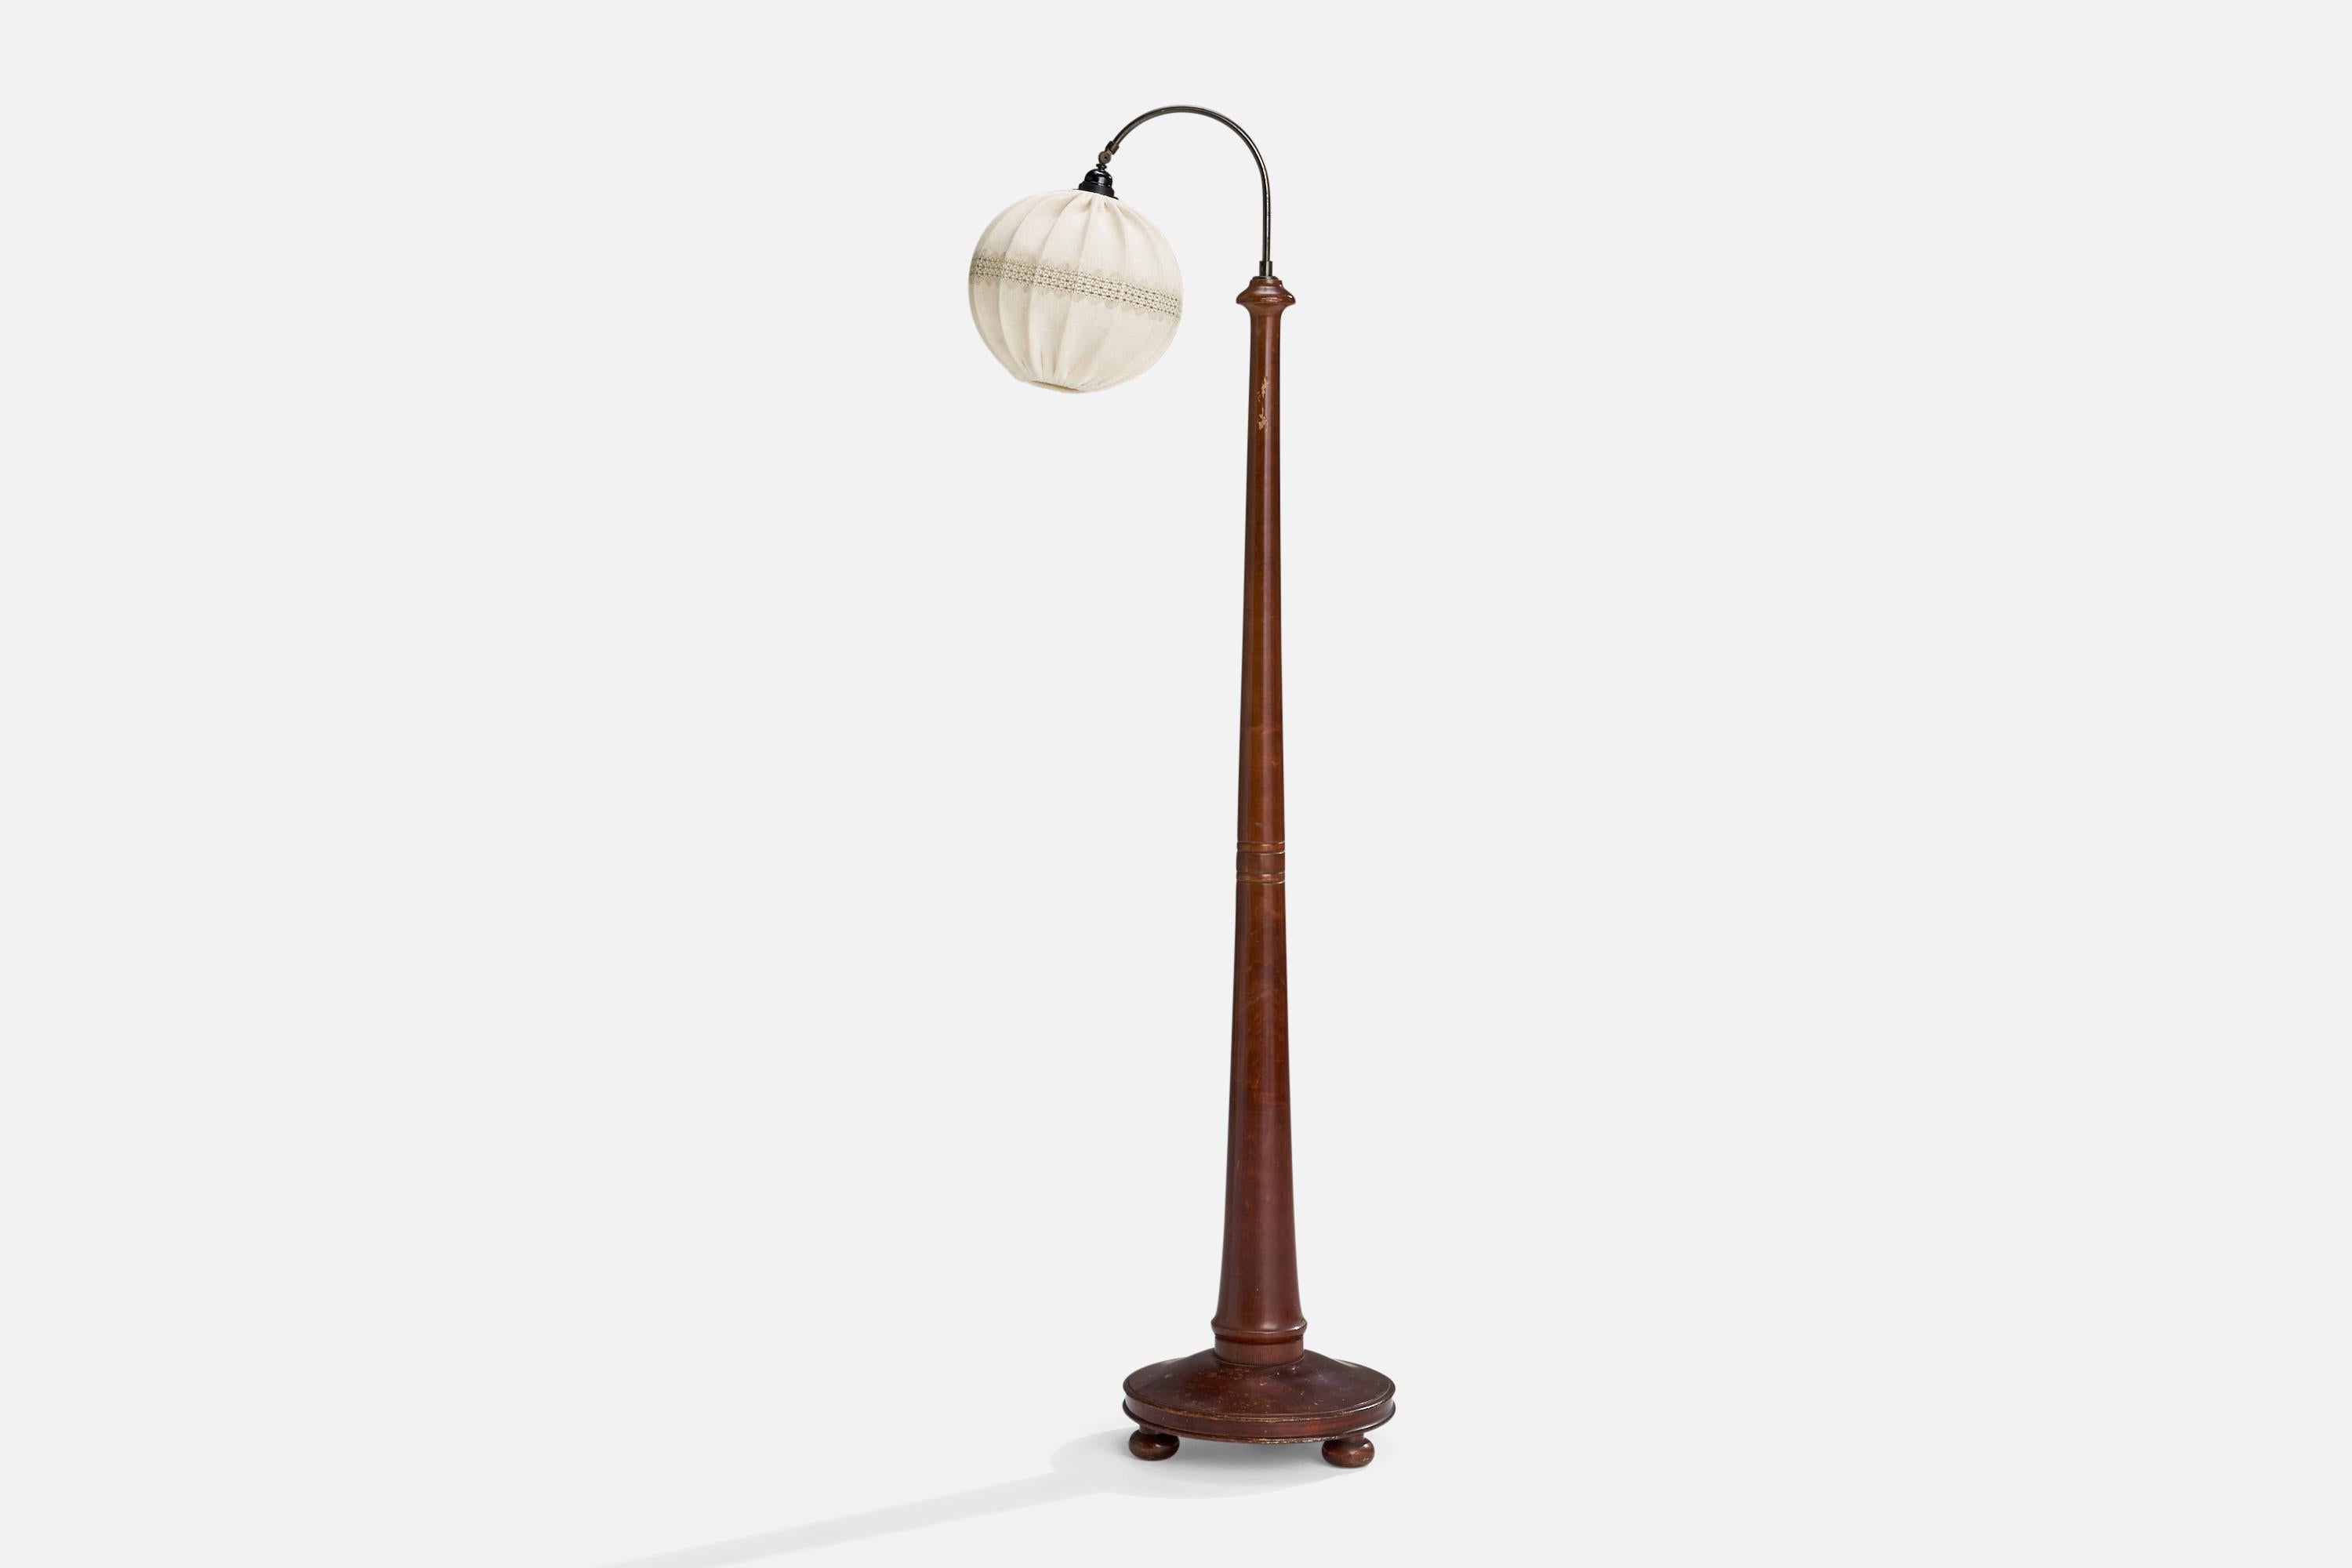 An adjustable brass, stained birch and fabric floor lamp designed and produced in Sweden, c. 1930s.

Overall Dimensions (inches): 64” H x 7.5” W x 21” D
Stated dimensions include shade.
Bulb Specifications: E-26 Bulb
Number of Sockets: 1
All